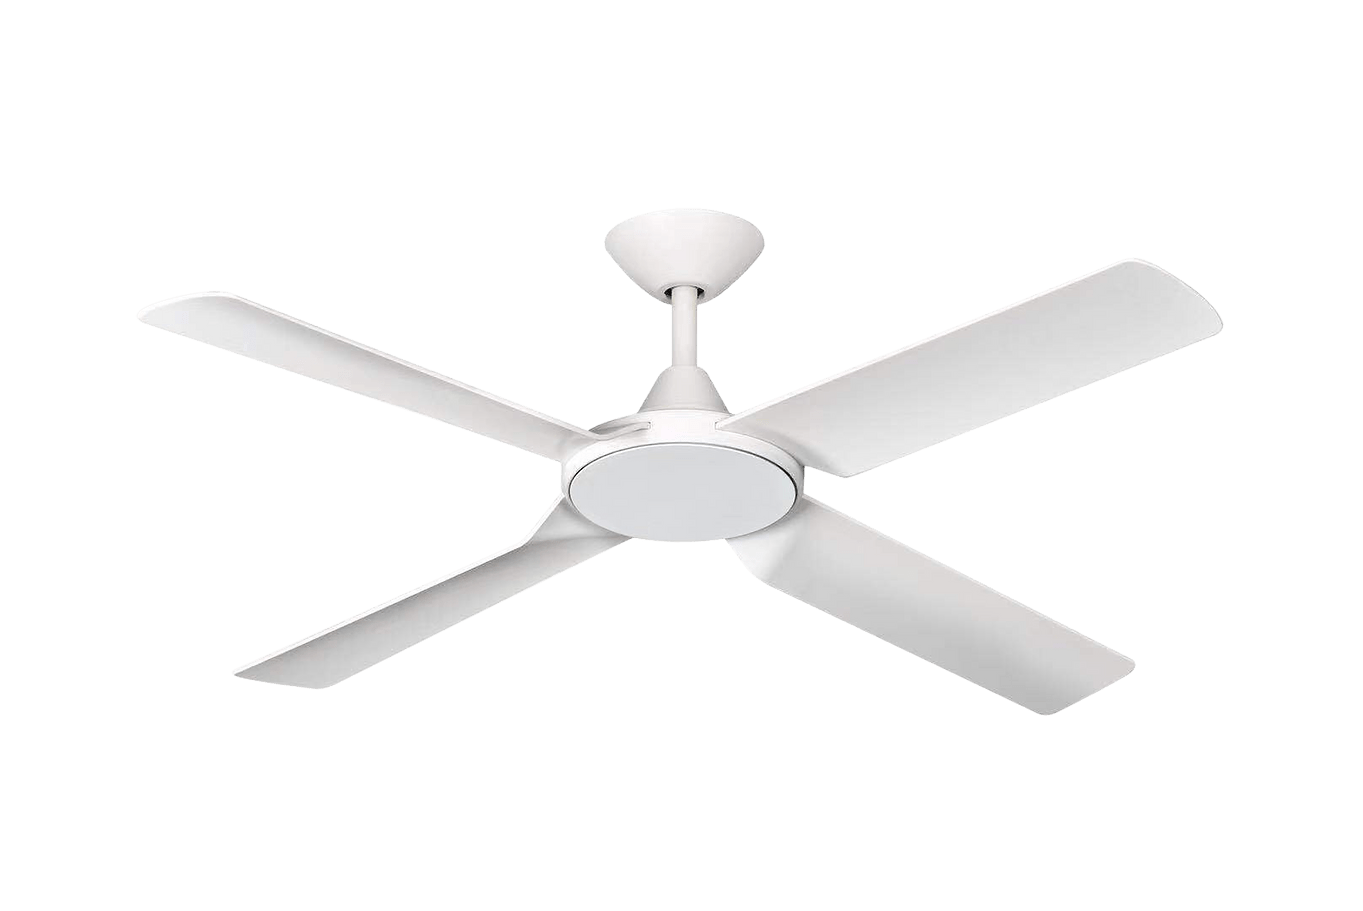 Hunter Pacific New Image v2 White DC Ceiling Fan Remote - Mases LightingHunter Pacific